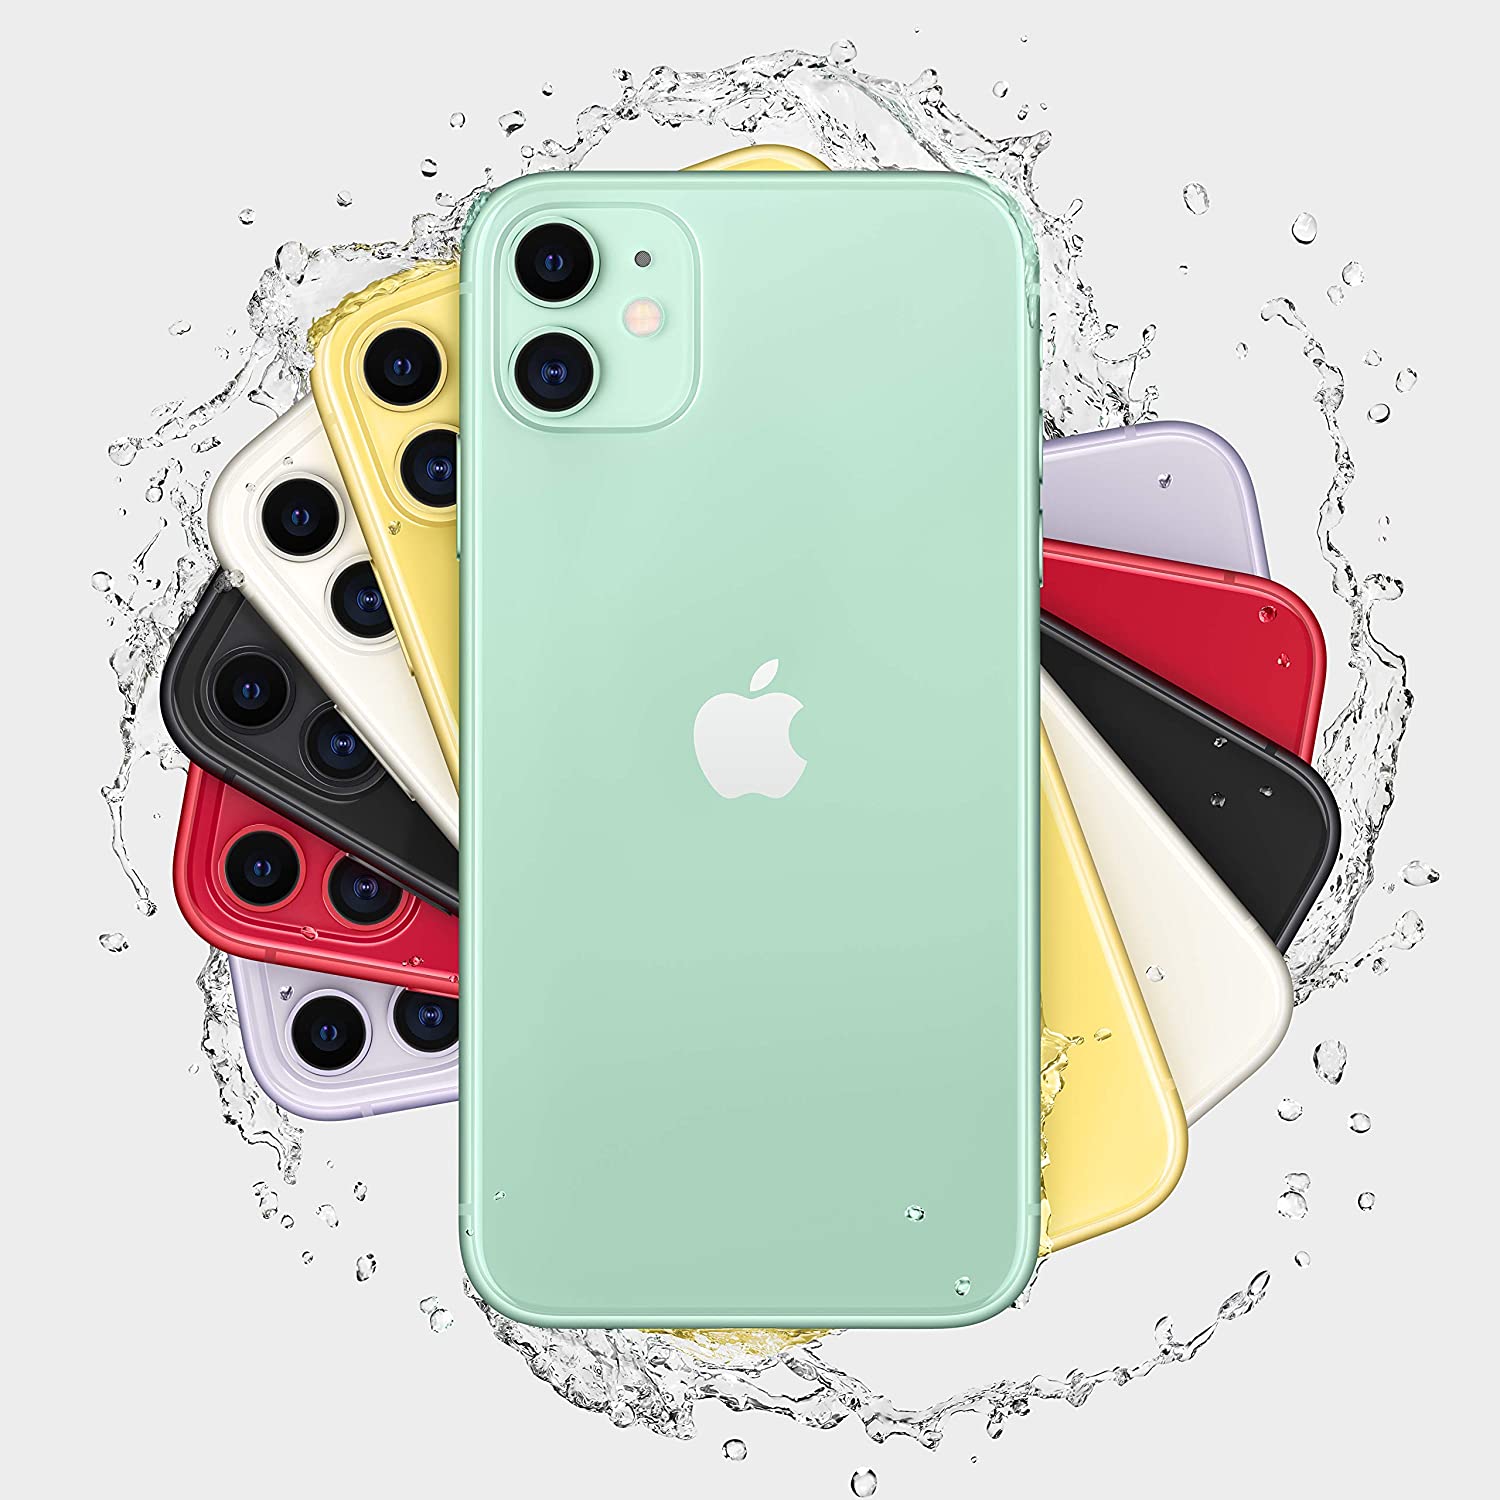 Amazon Sale: The best selling iPhone 11 in Amazon's sale has got a tremendous offer, you can buy in the deal at a low price of up to 23 thousand